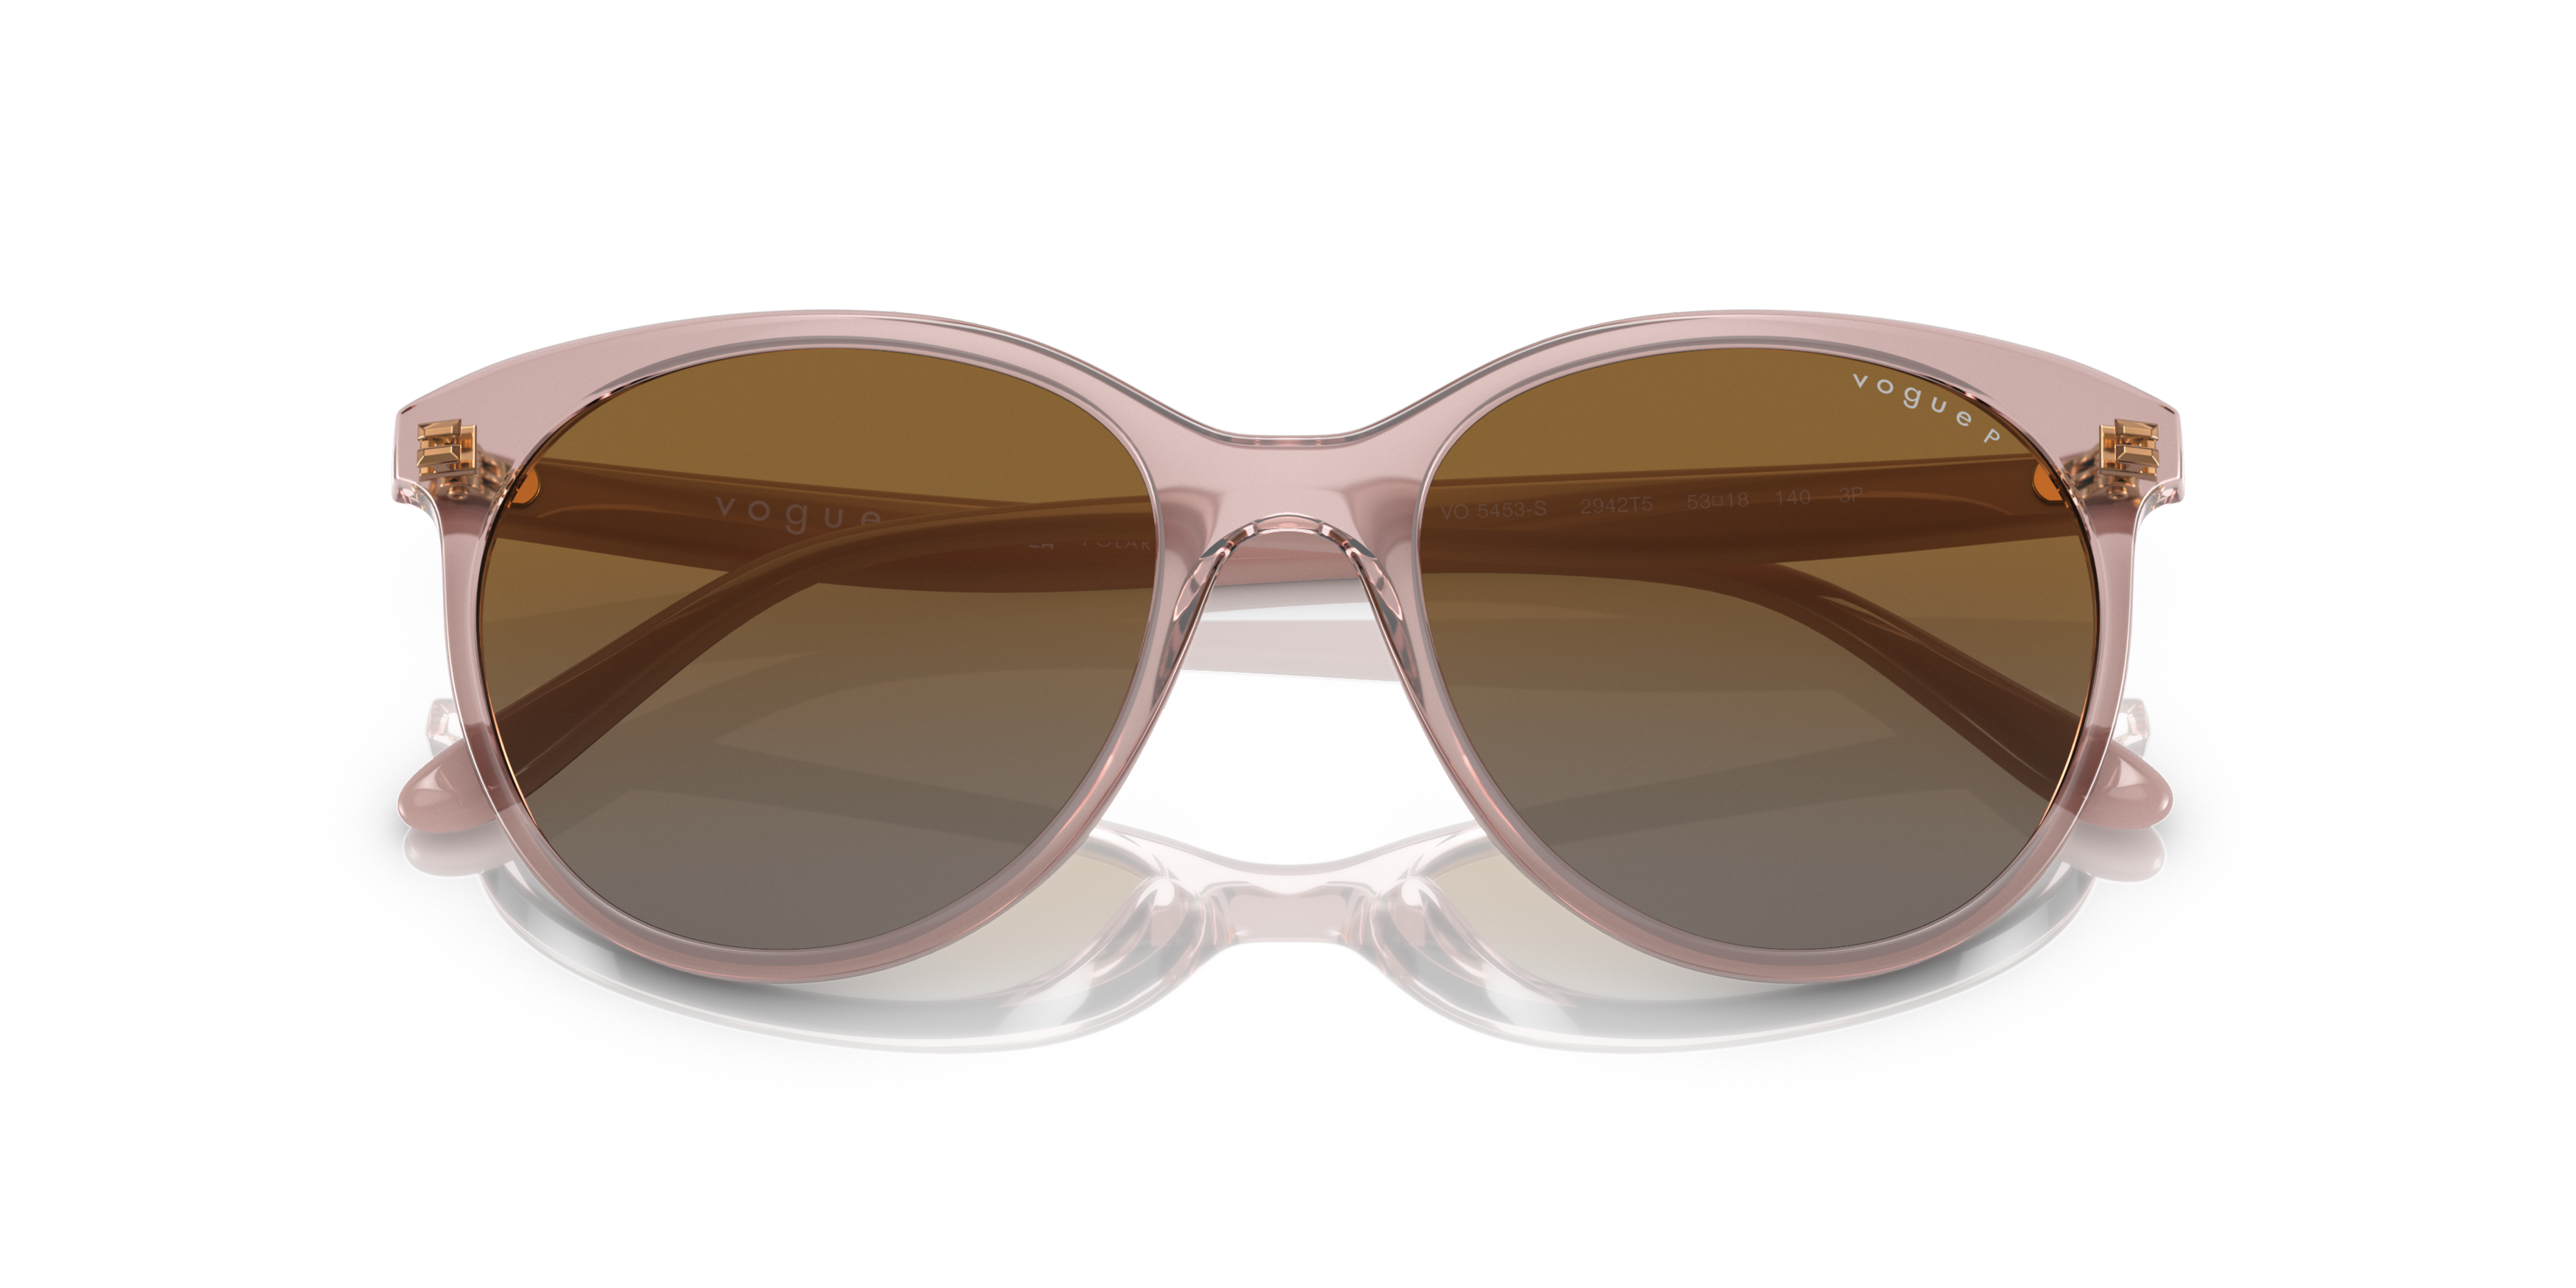 [products.image.folded] Vogue VO 5453S Sunglasses